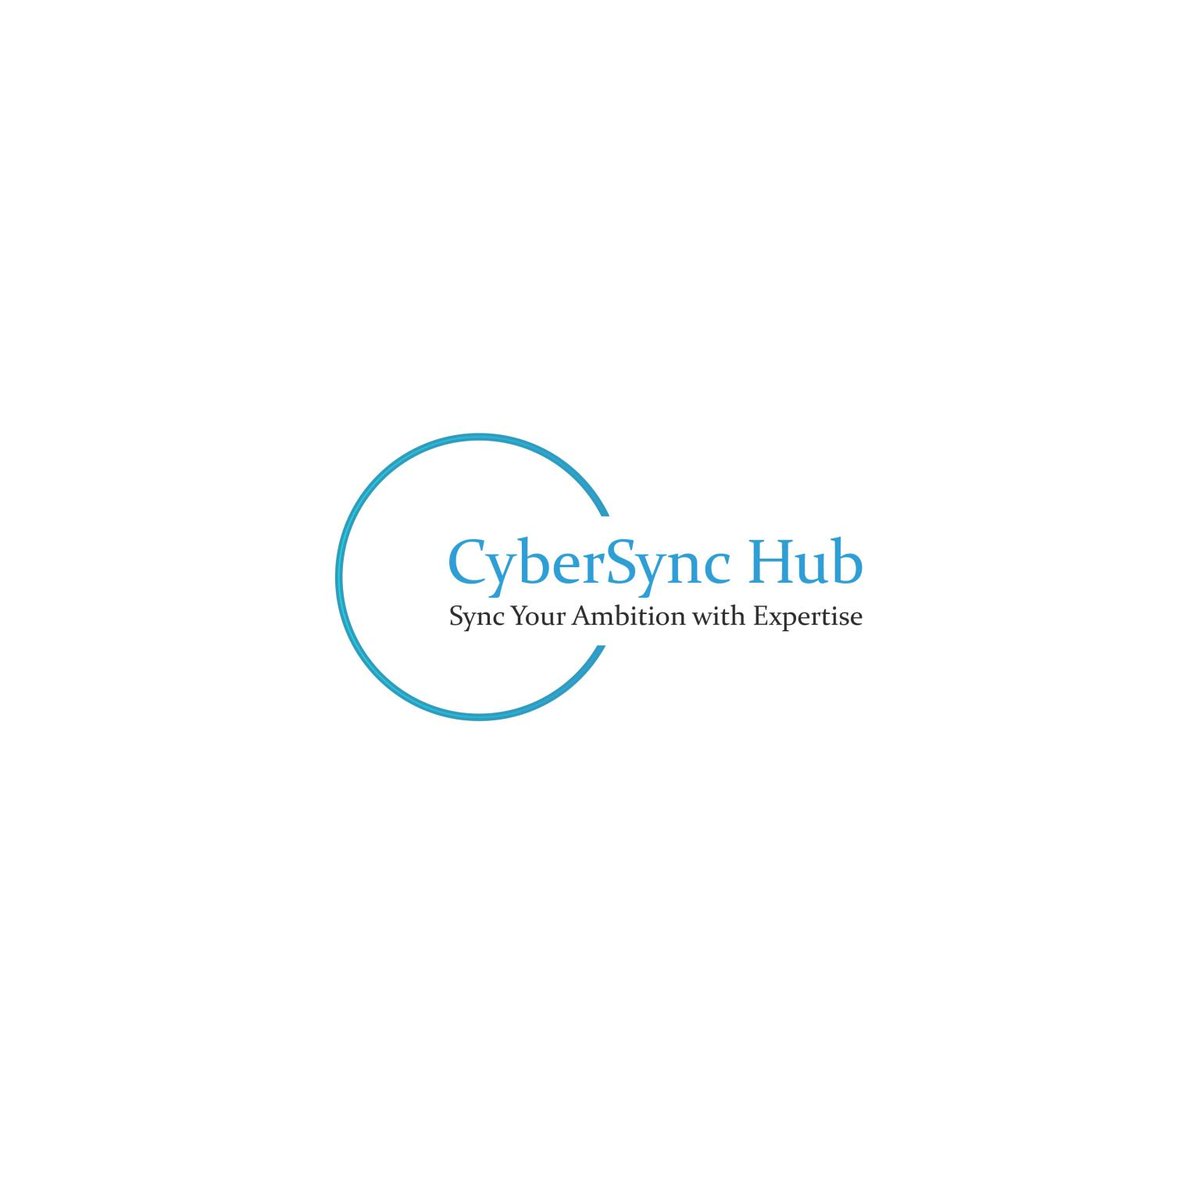 Securing tomorrow's digital landscape today! Excited to kick off our journey at CyberSync Hub. Join us in the pursuit of cutting-edge cybersecurity solutions and a thriving community. Let's empower a safer digital future. 💻🔐 #DigitalSafety #CyberSyncHub #CyberAwareness